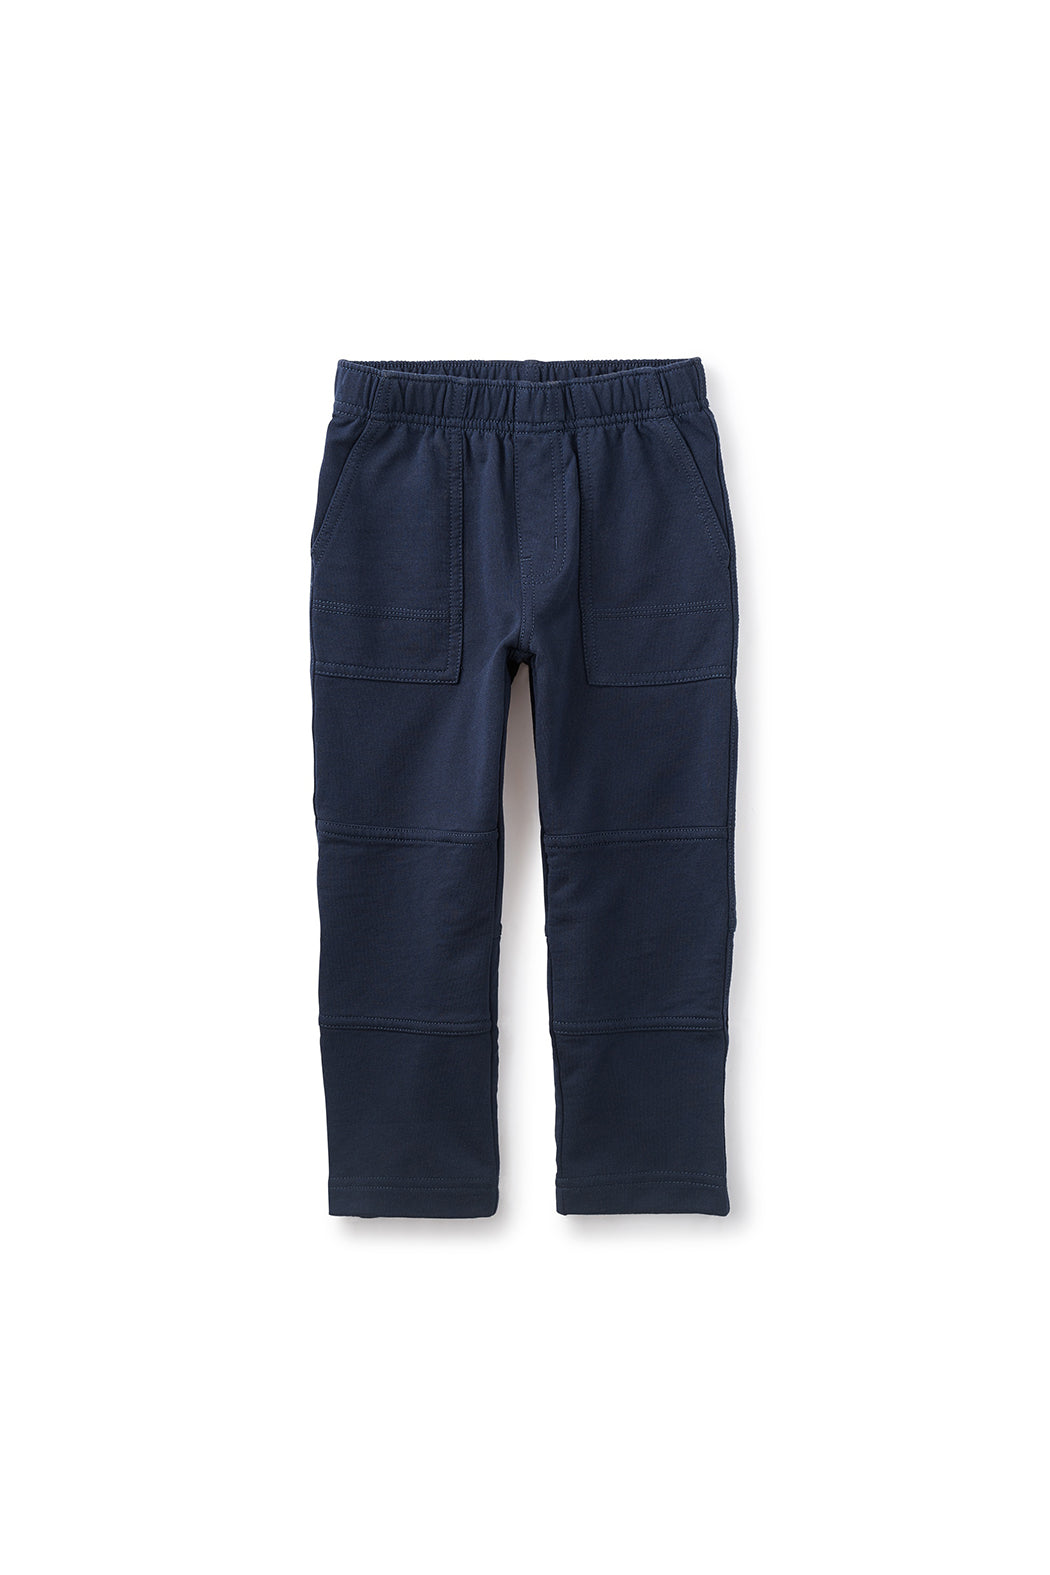 Tea Collection French Terry Playwear Pants - Heritage Blue